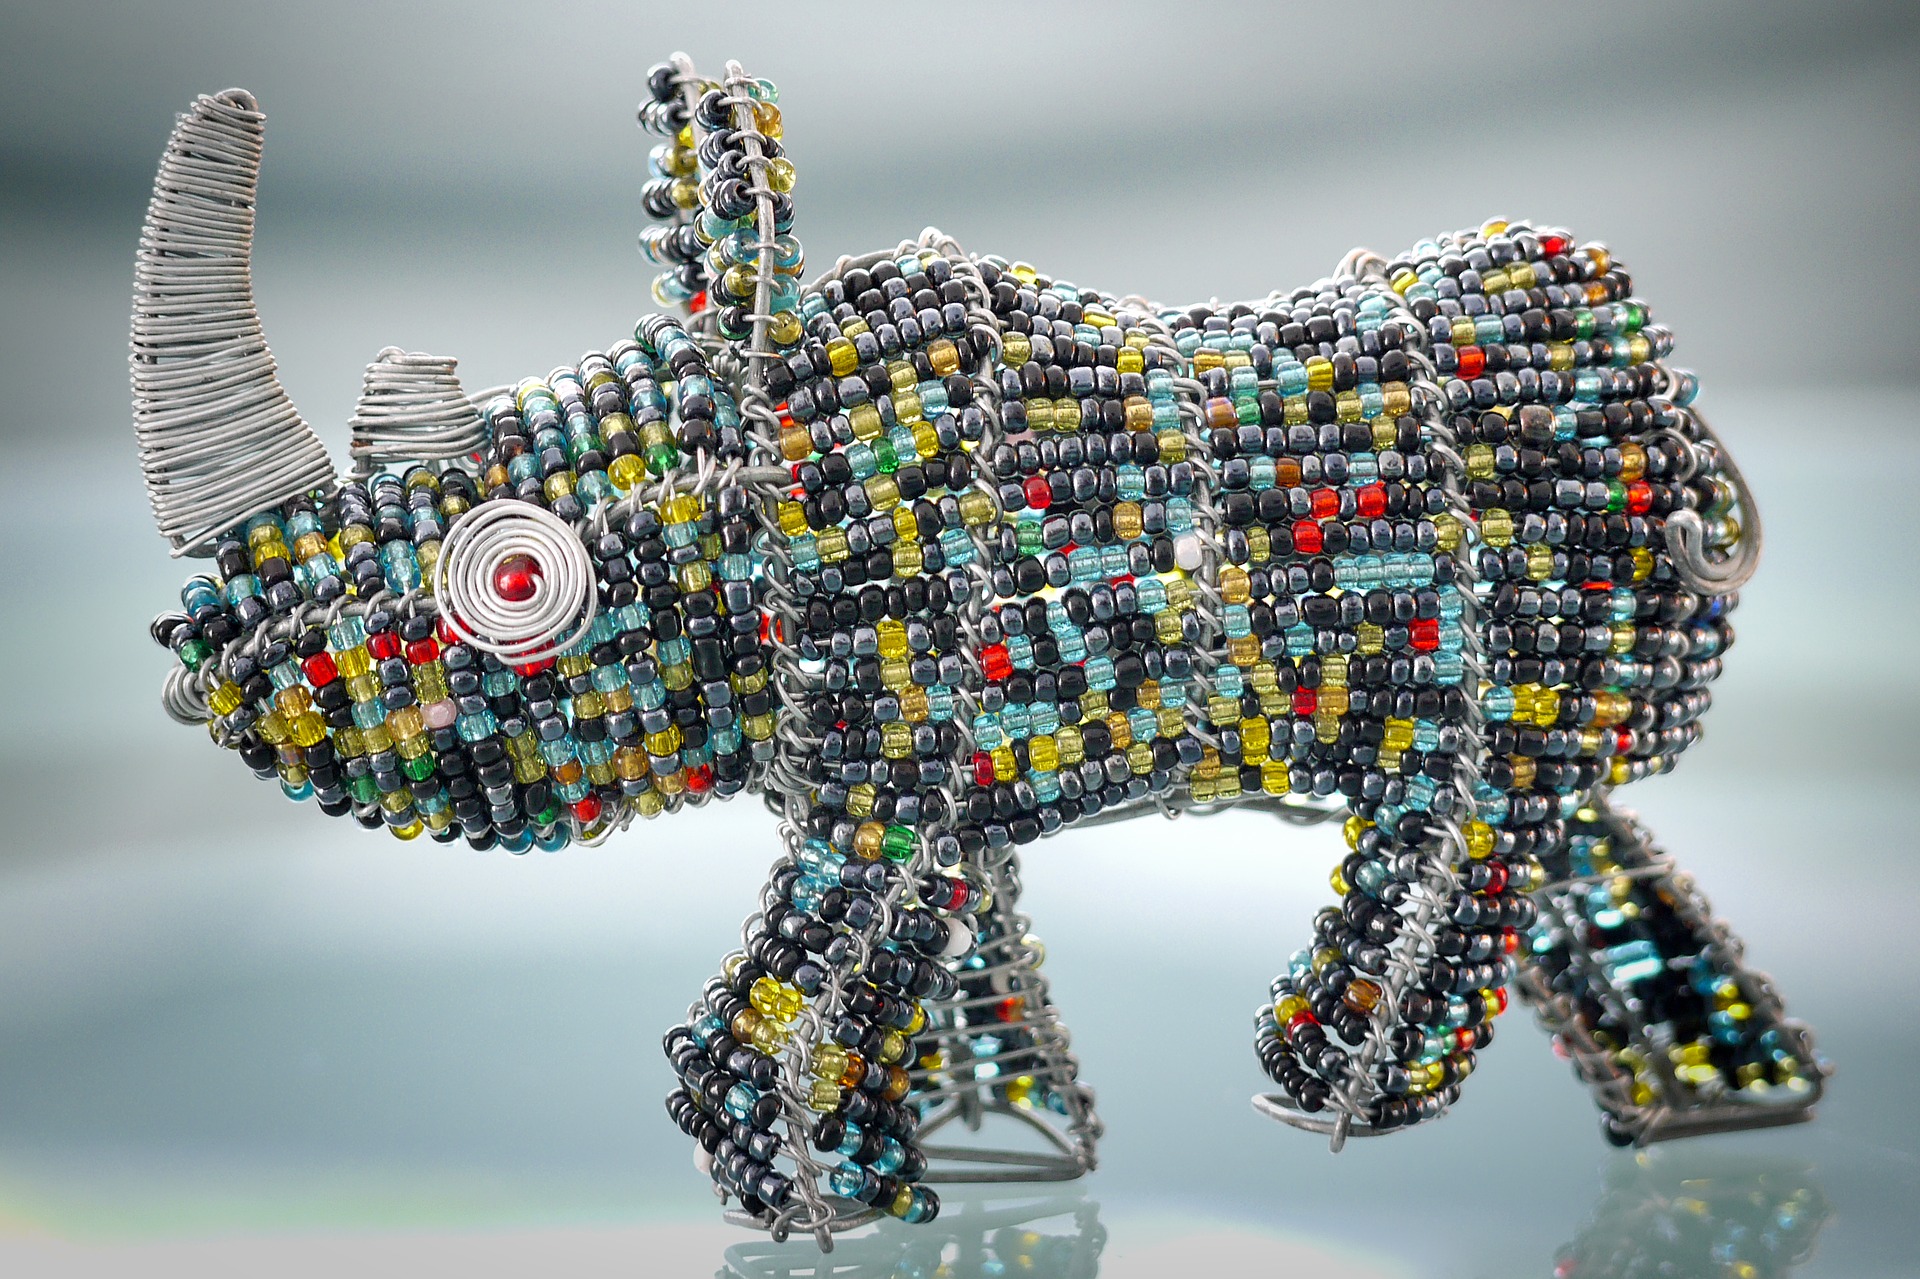 Rhinocerous made out of beads